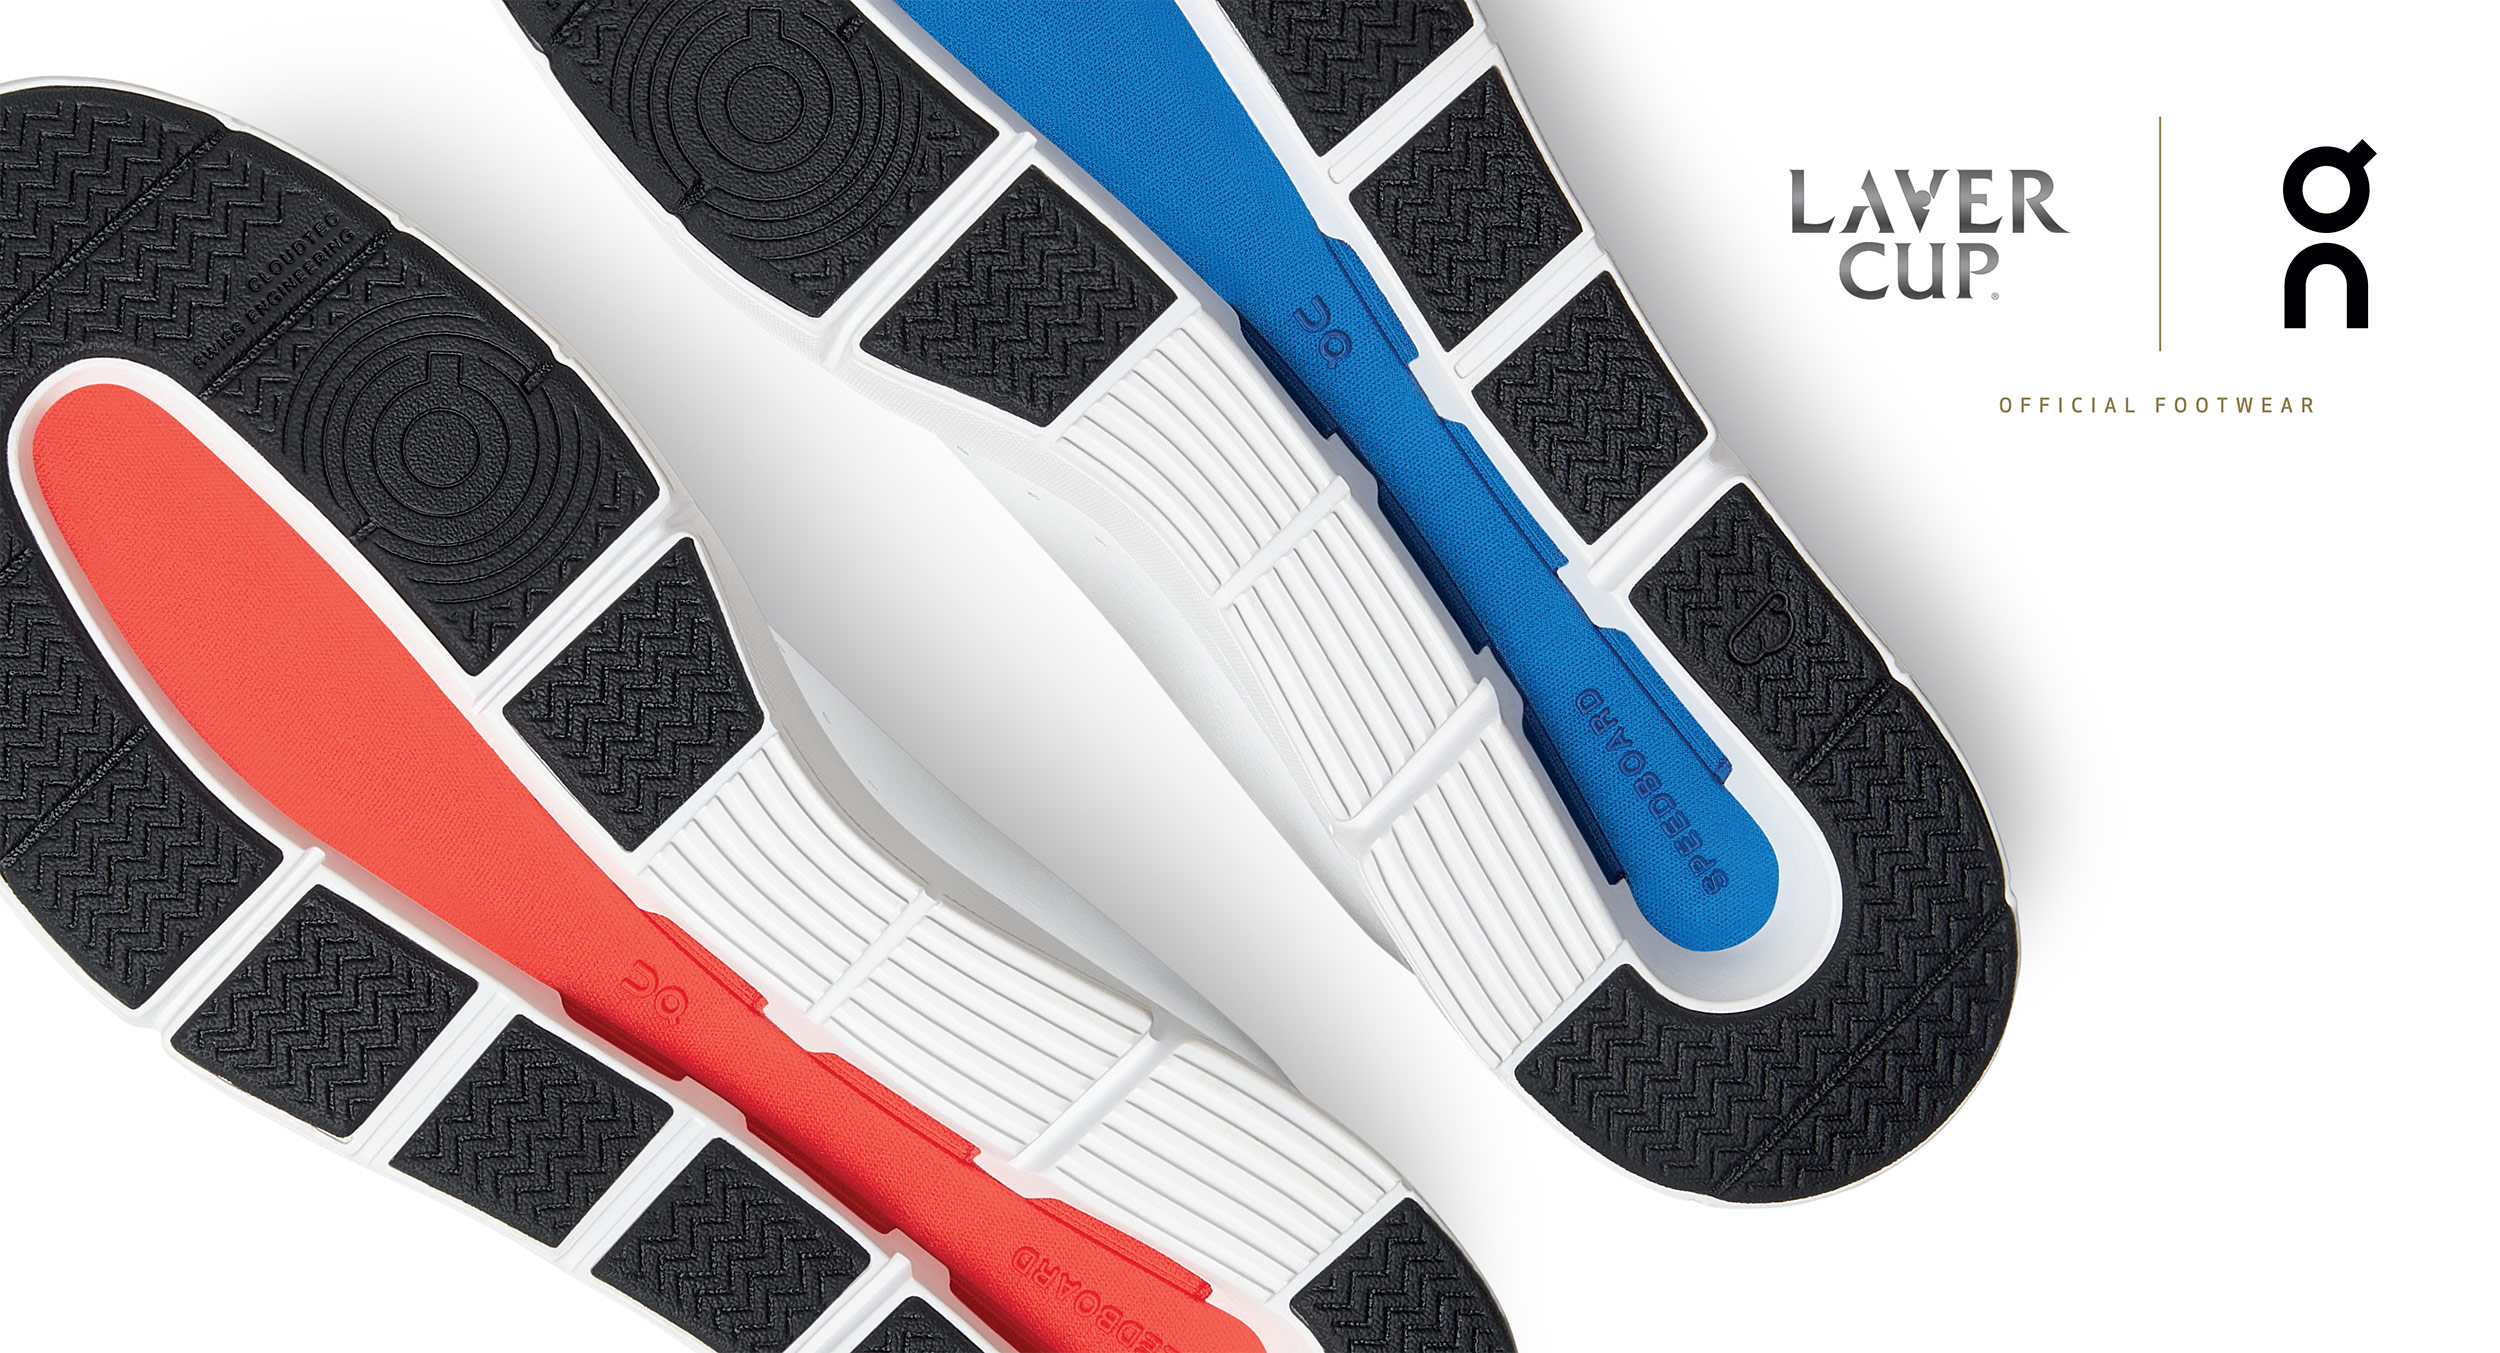 On announced as footwear sponsor News Laver Cup